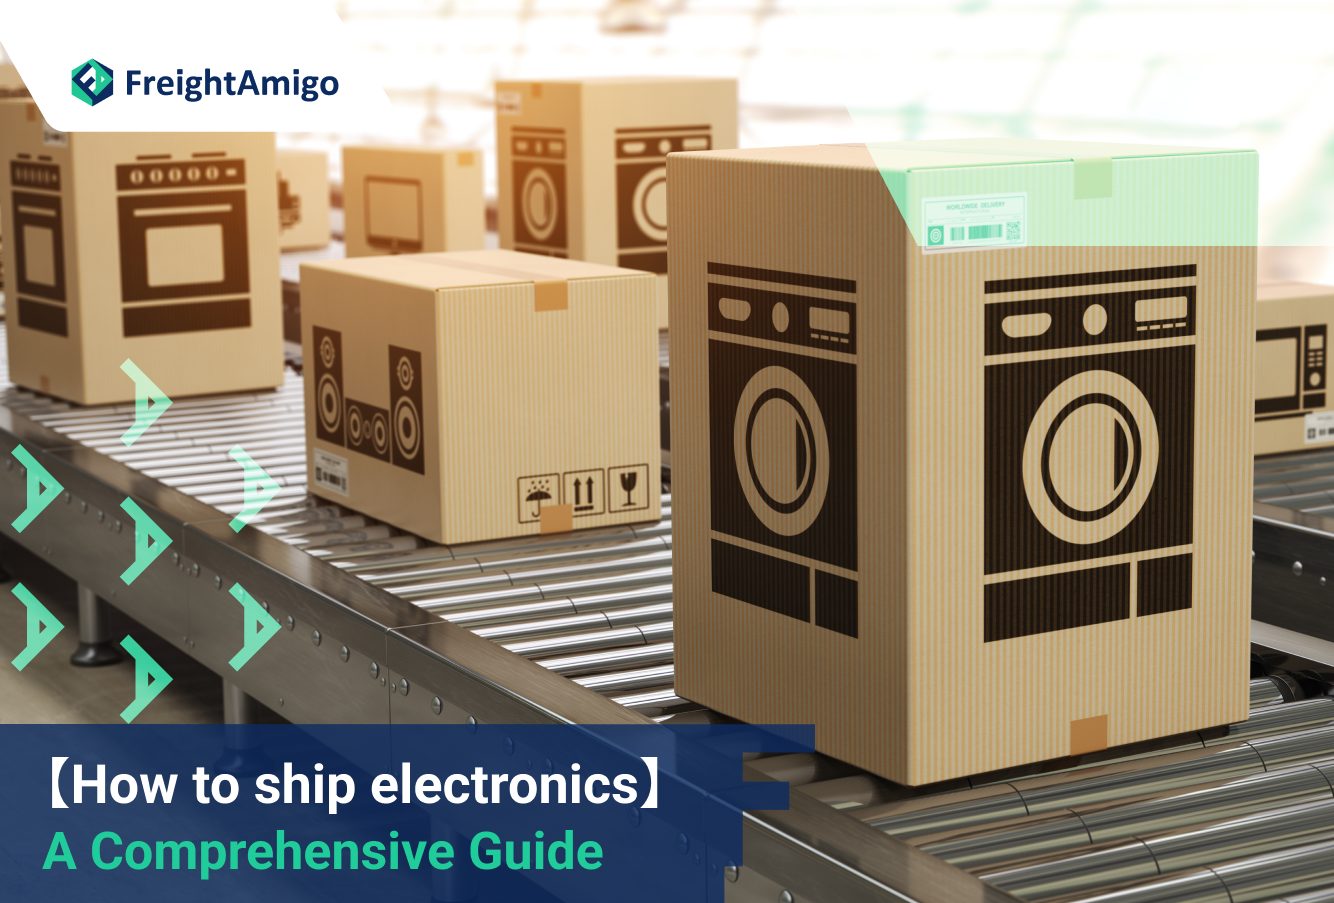 How to ship electronics: A Comprehensive Guide